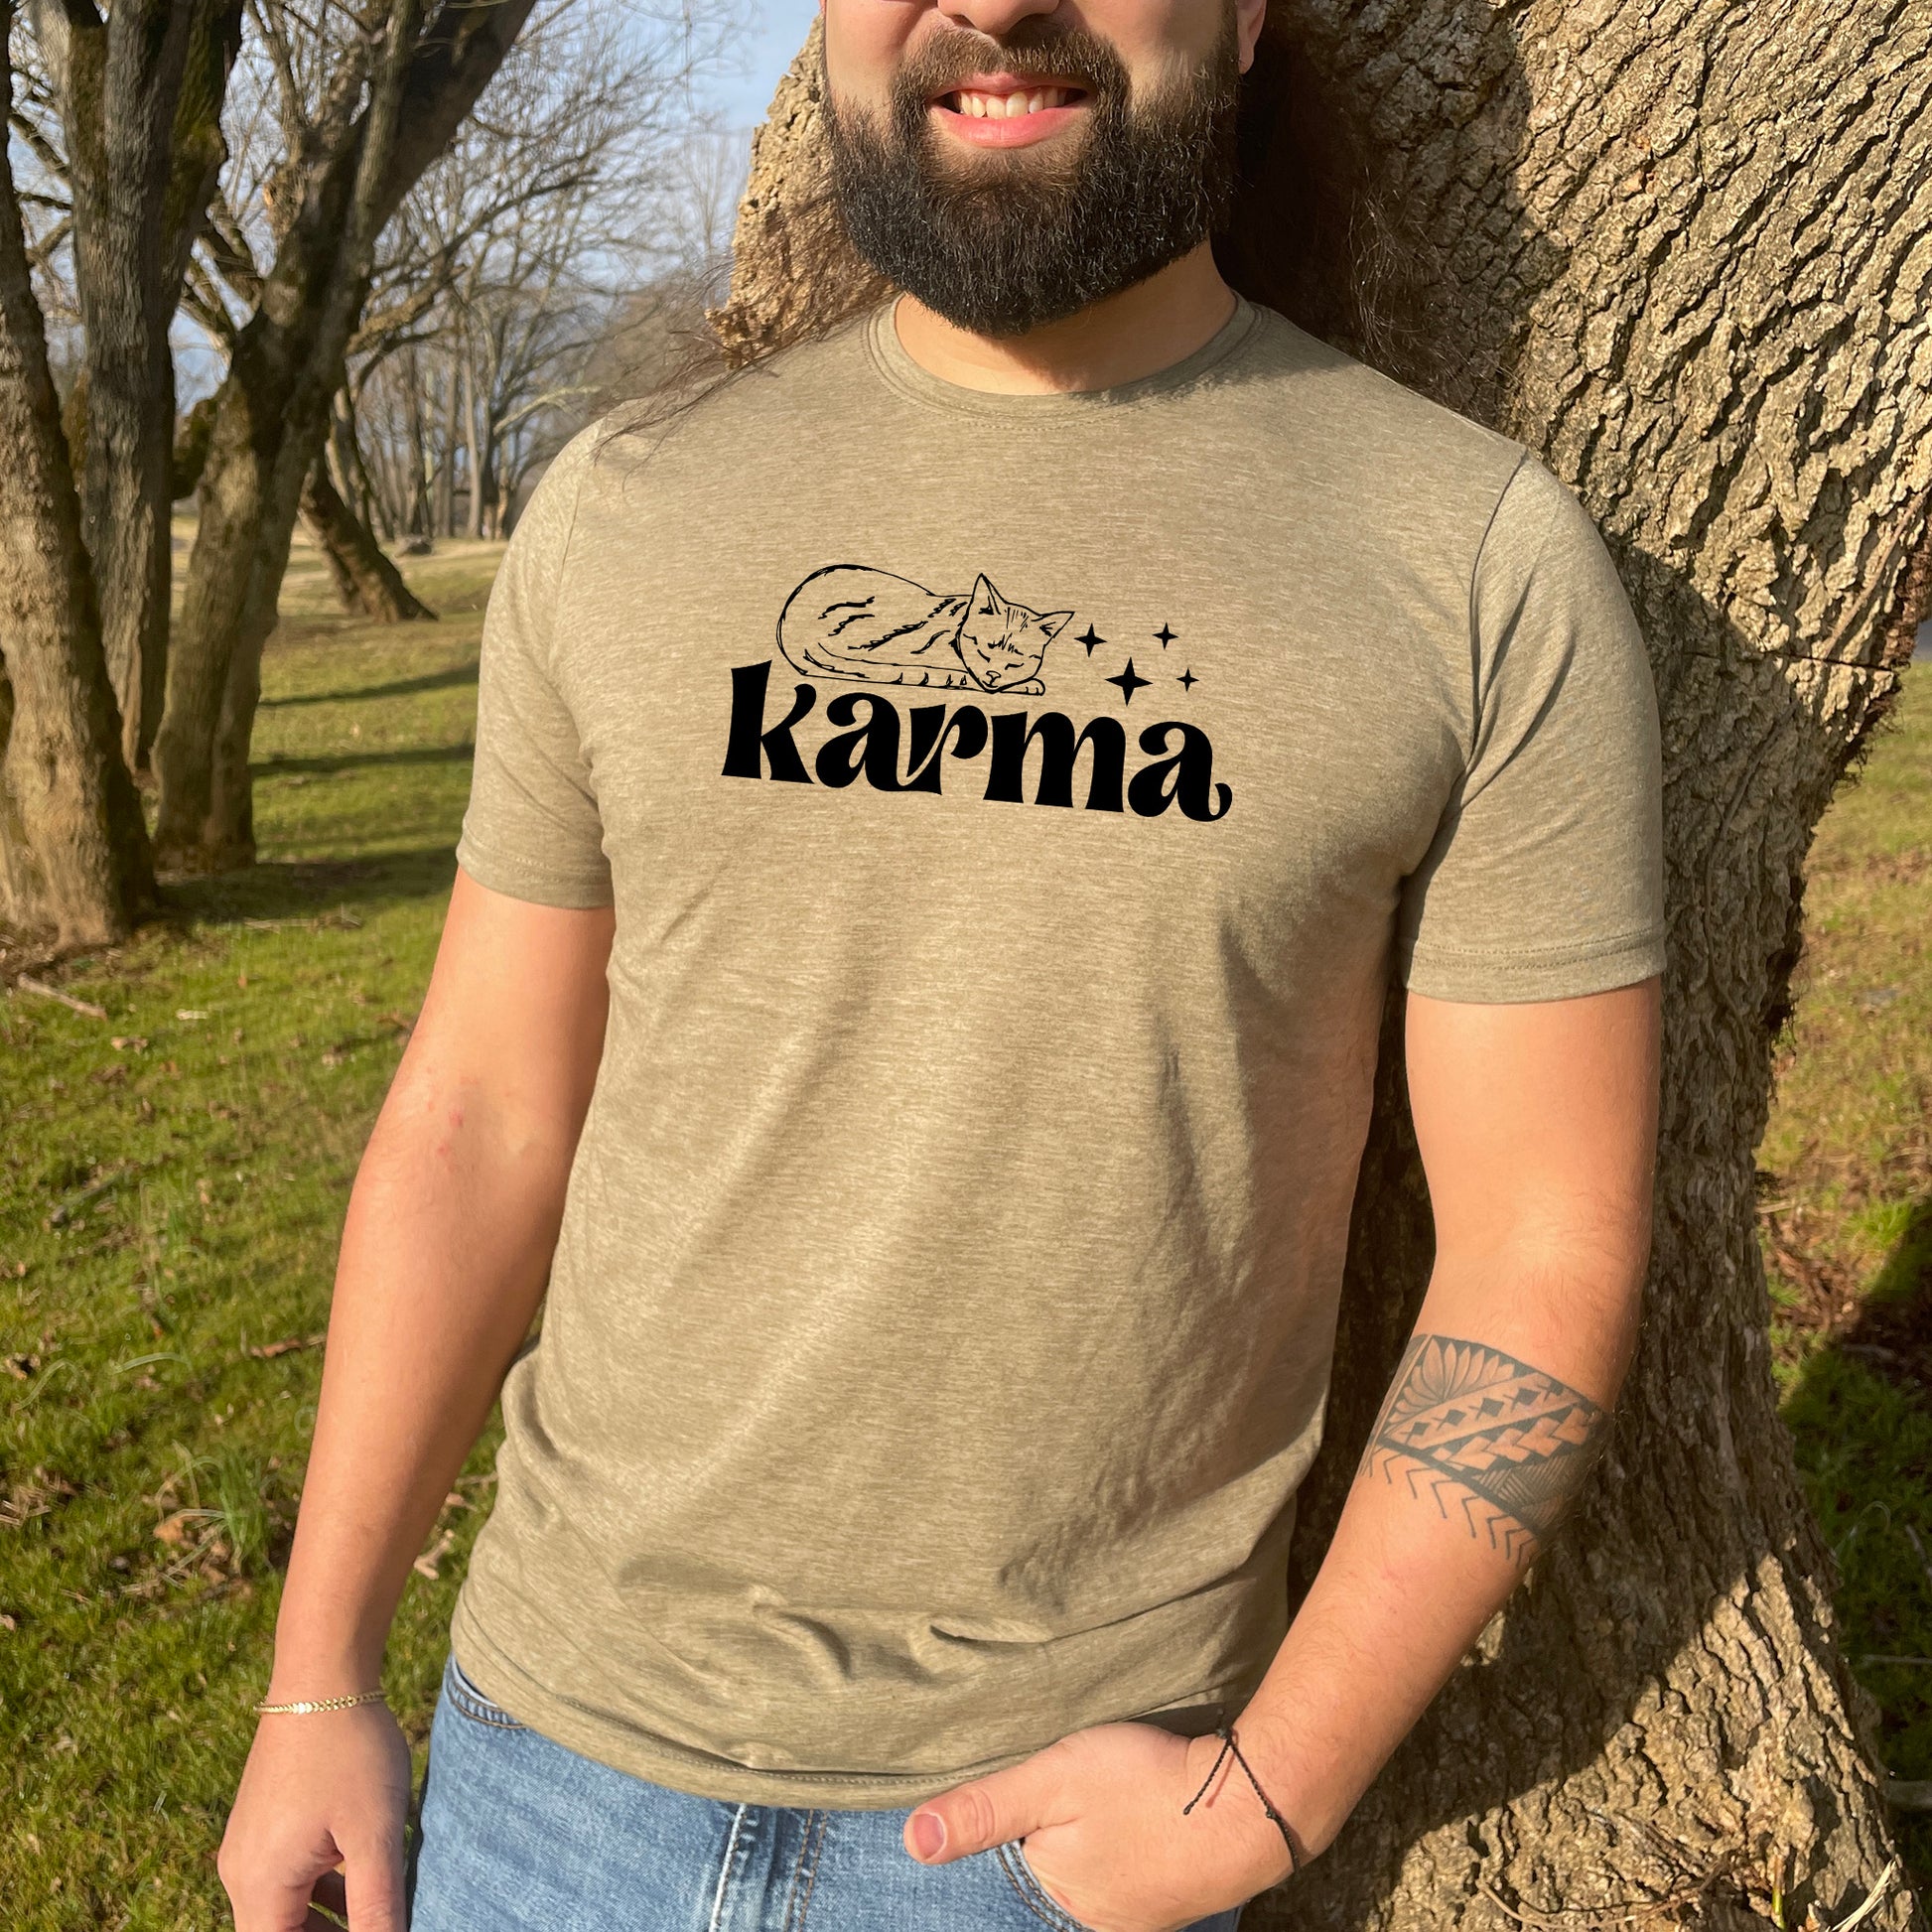 a man standing in front of a tree wearing a t - shirt that says ka